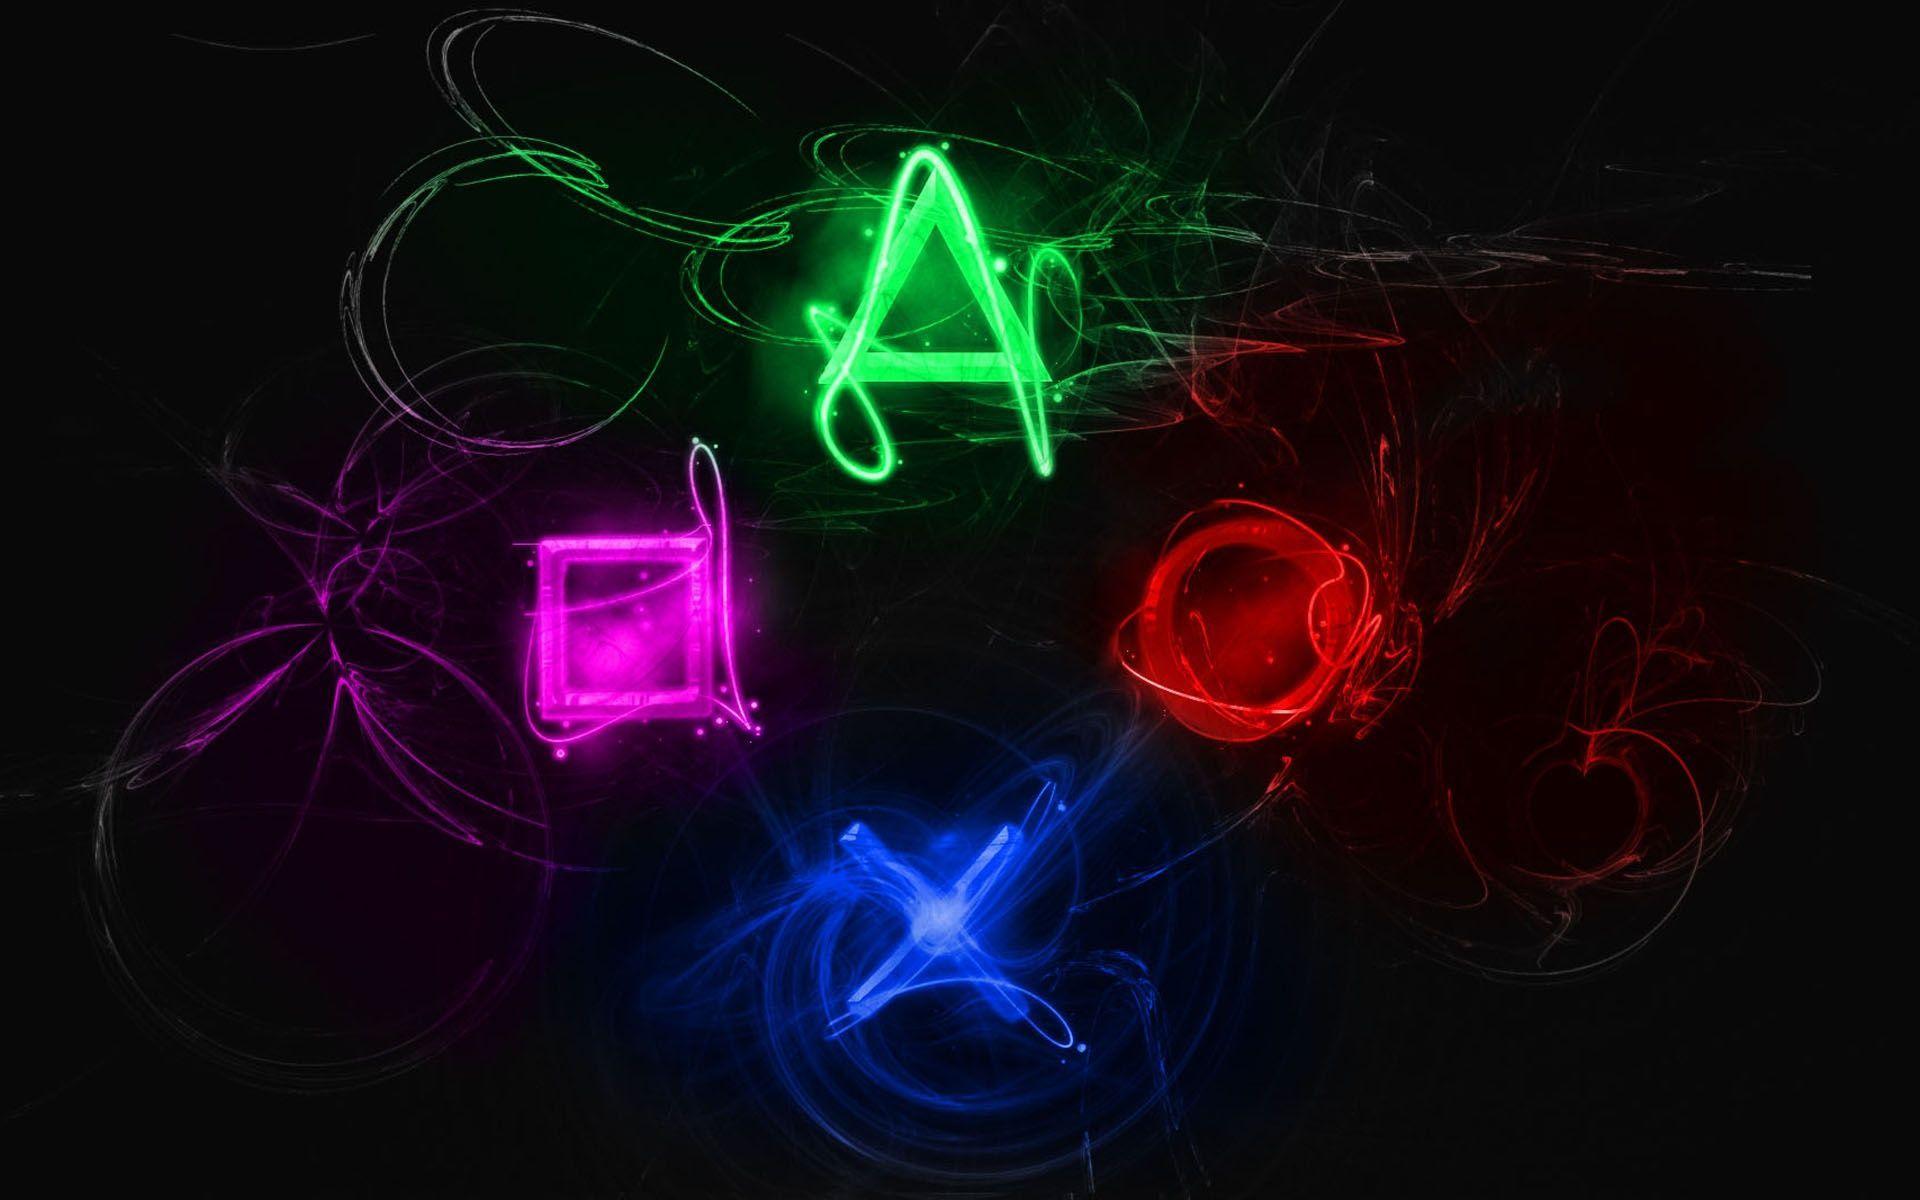 Sony Xperia Wallpaper in HD K and wide sizes. Game Humor